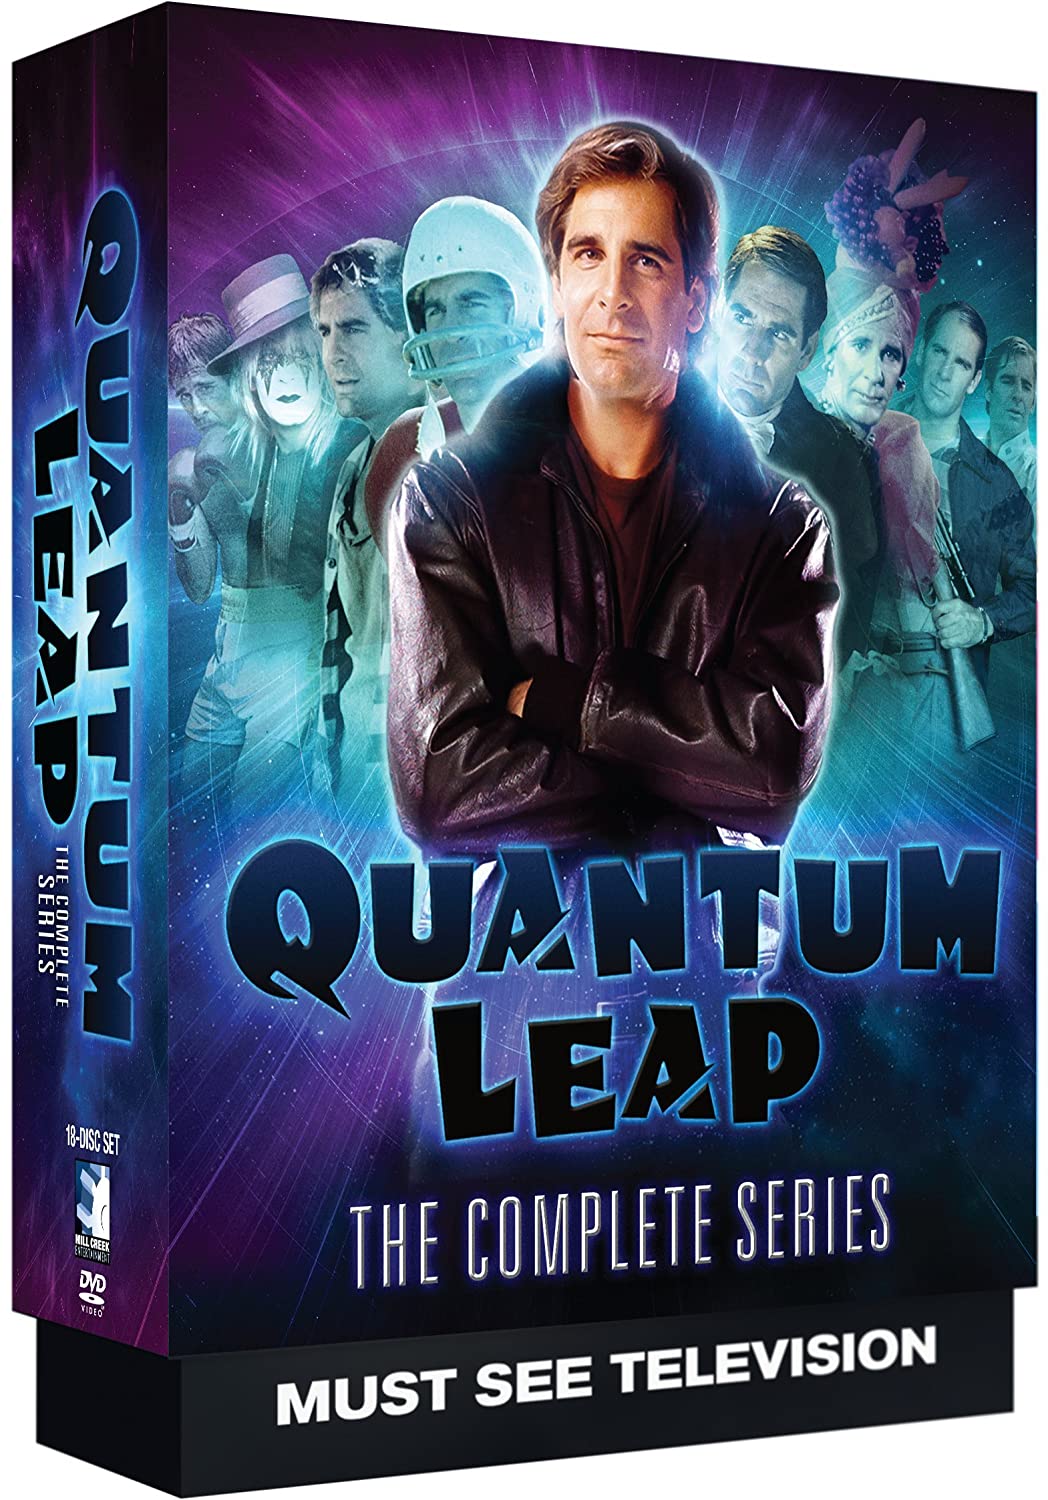 Quantum Leap: The Complete Series (DVD) $10 at Amazon